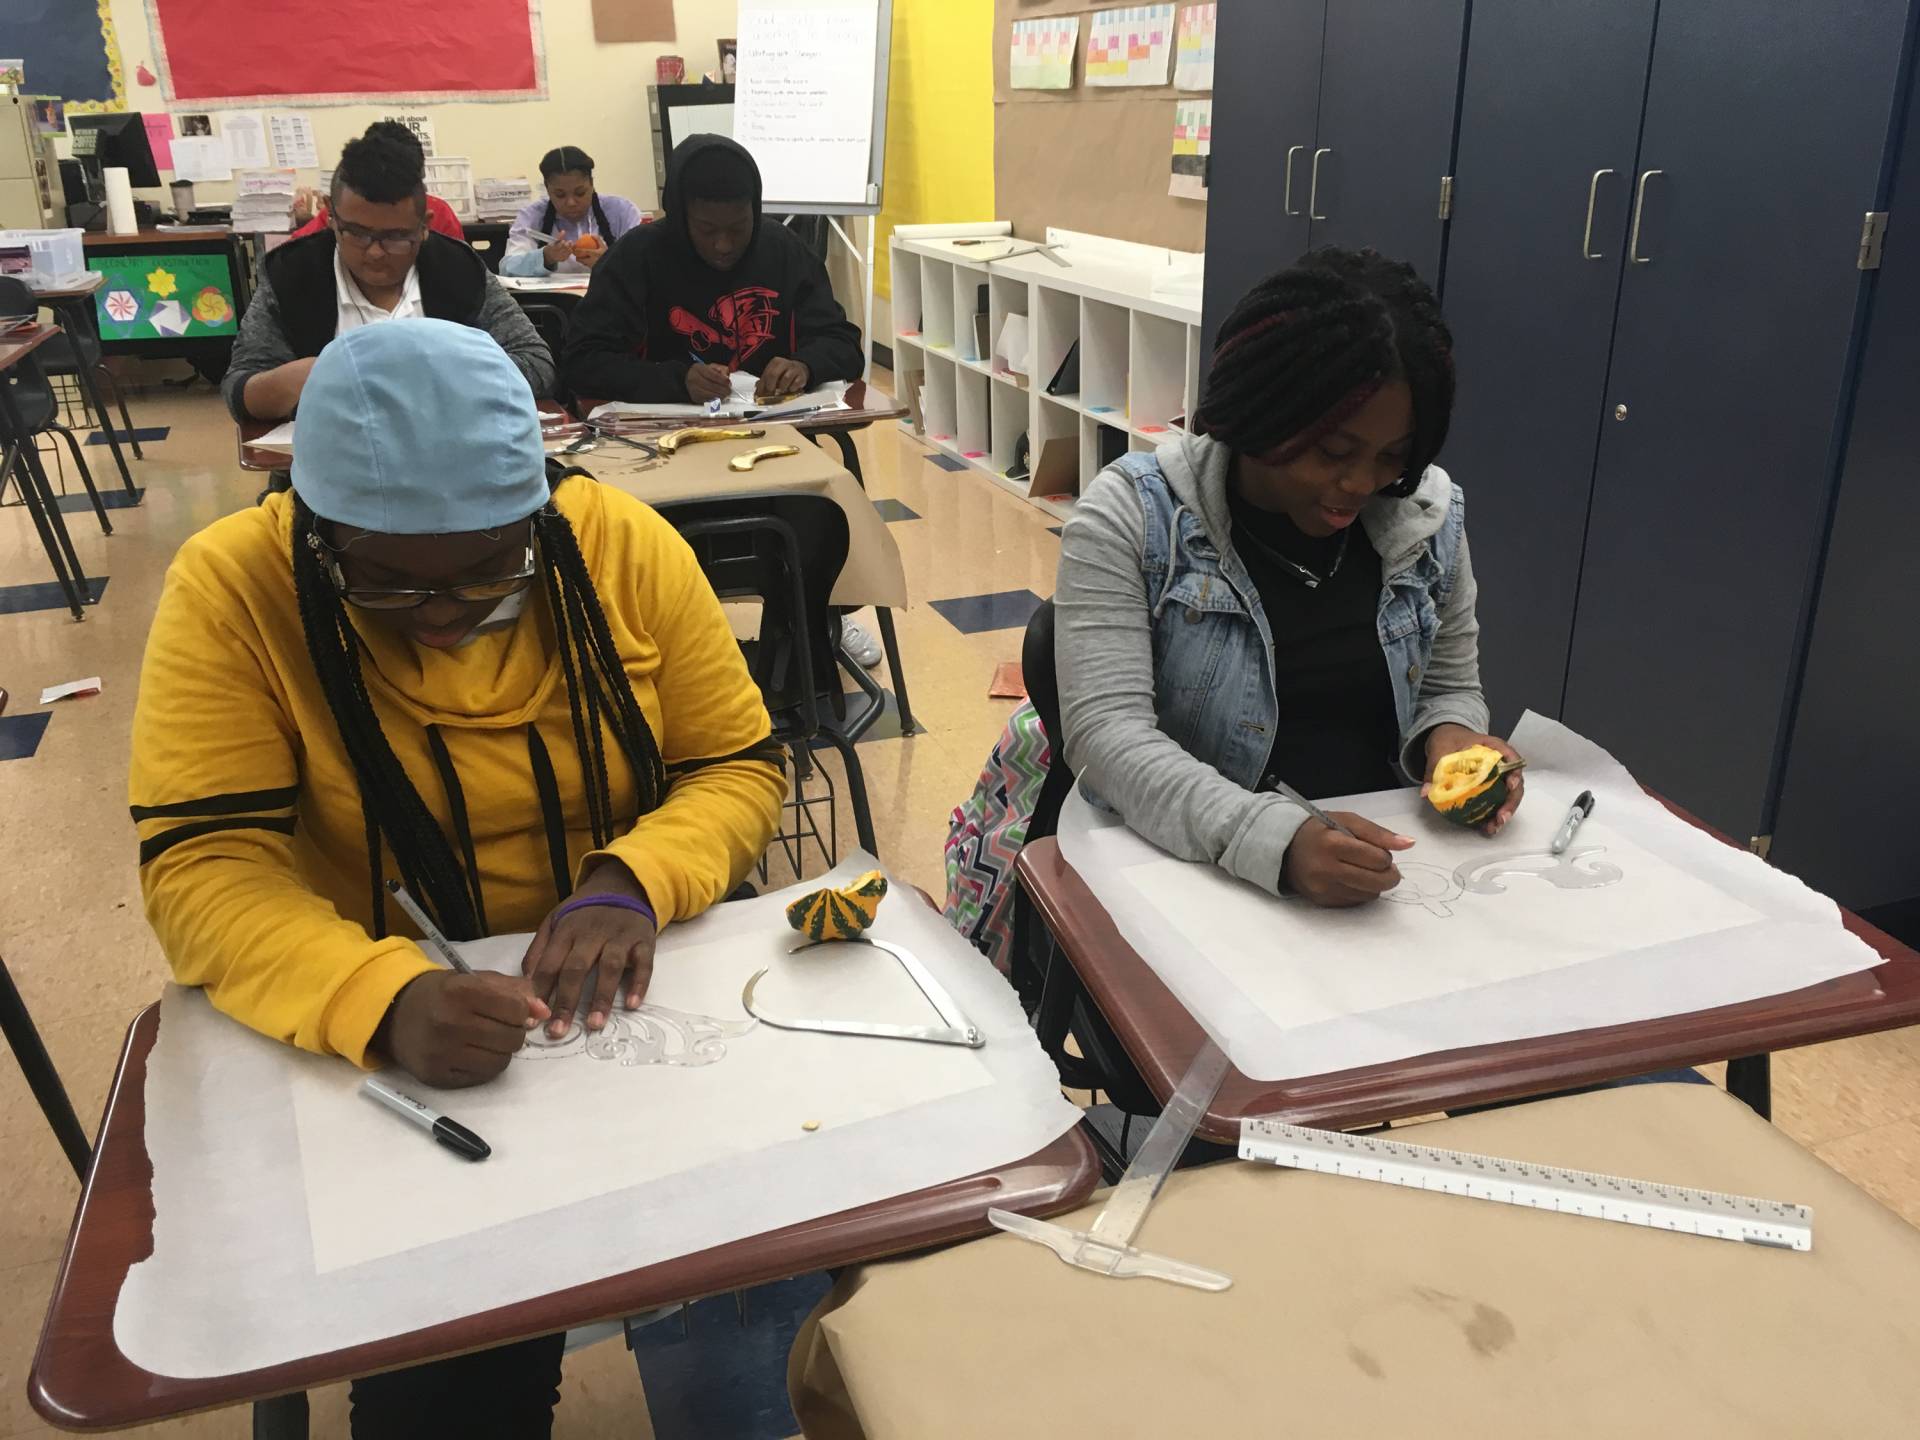 Students doing drawing exercises in class at Trenton Central High School